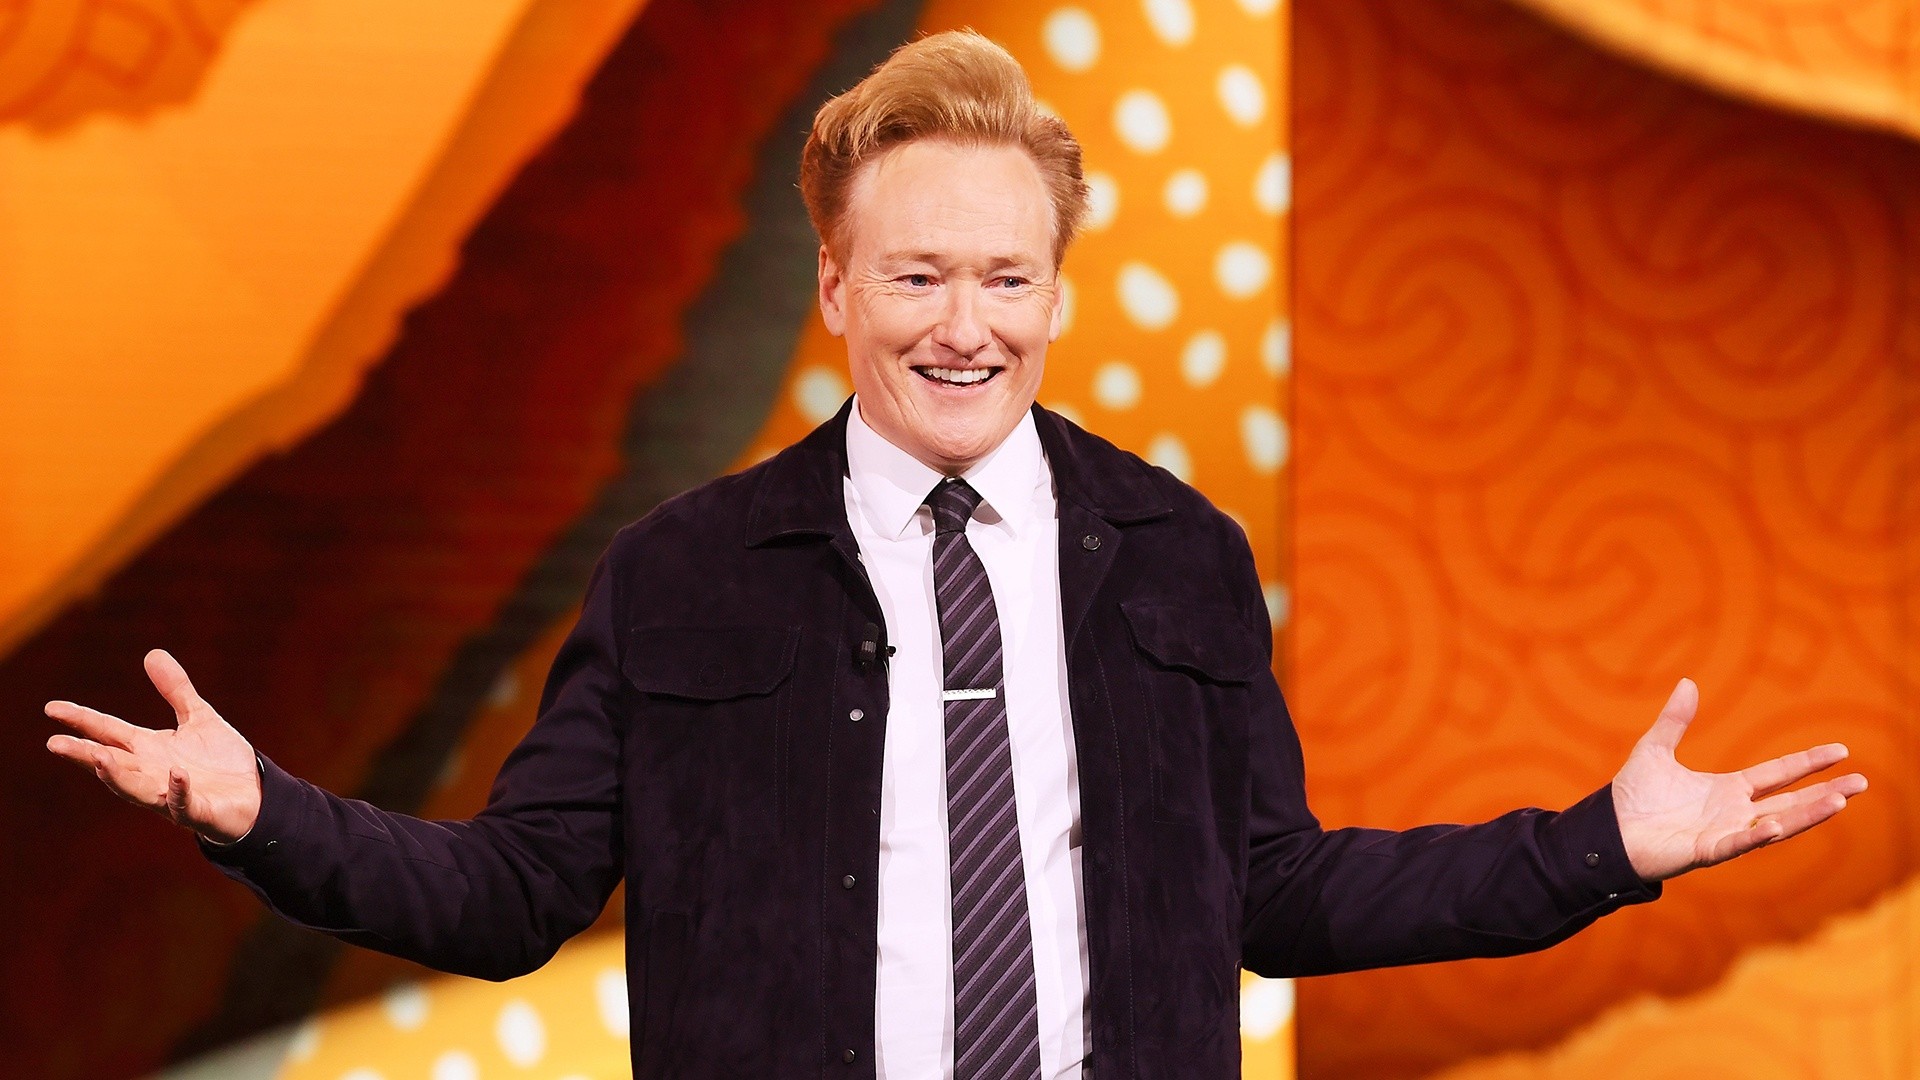 Conan O'Brien to return as guest on 'The Tonight Show'